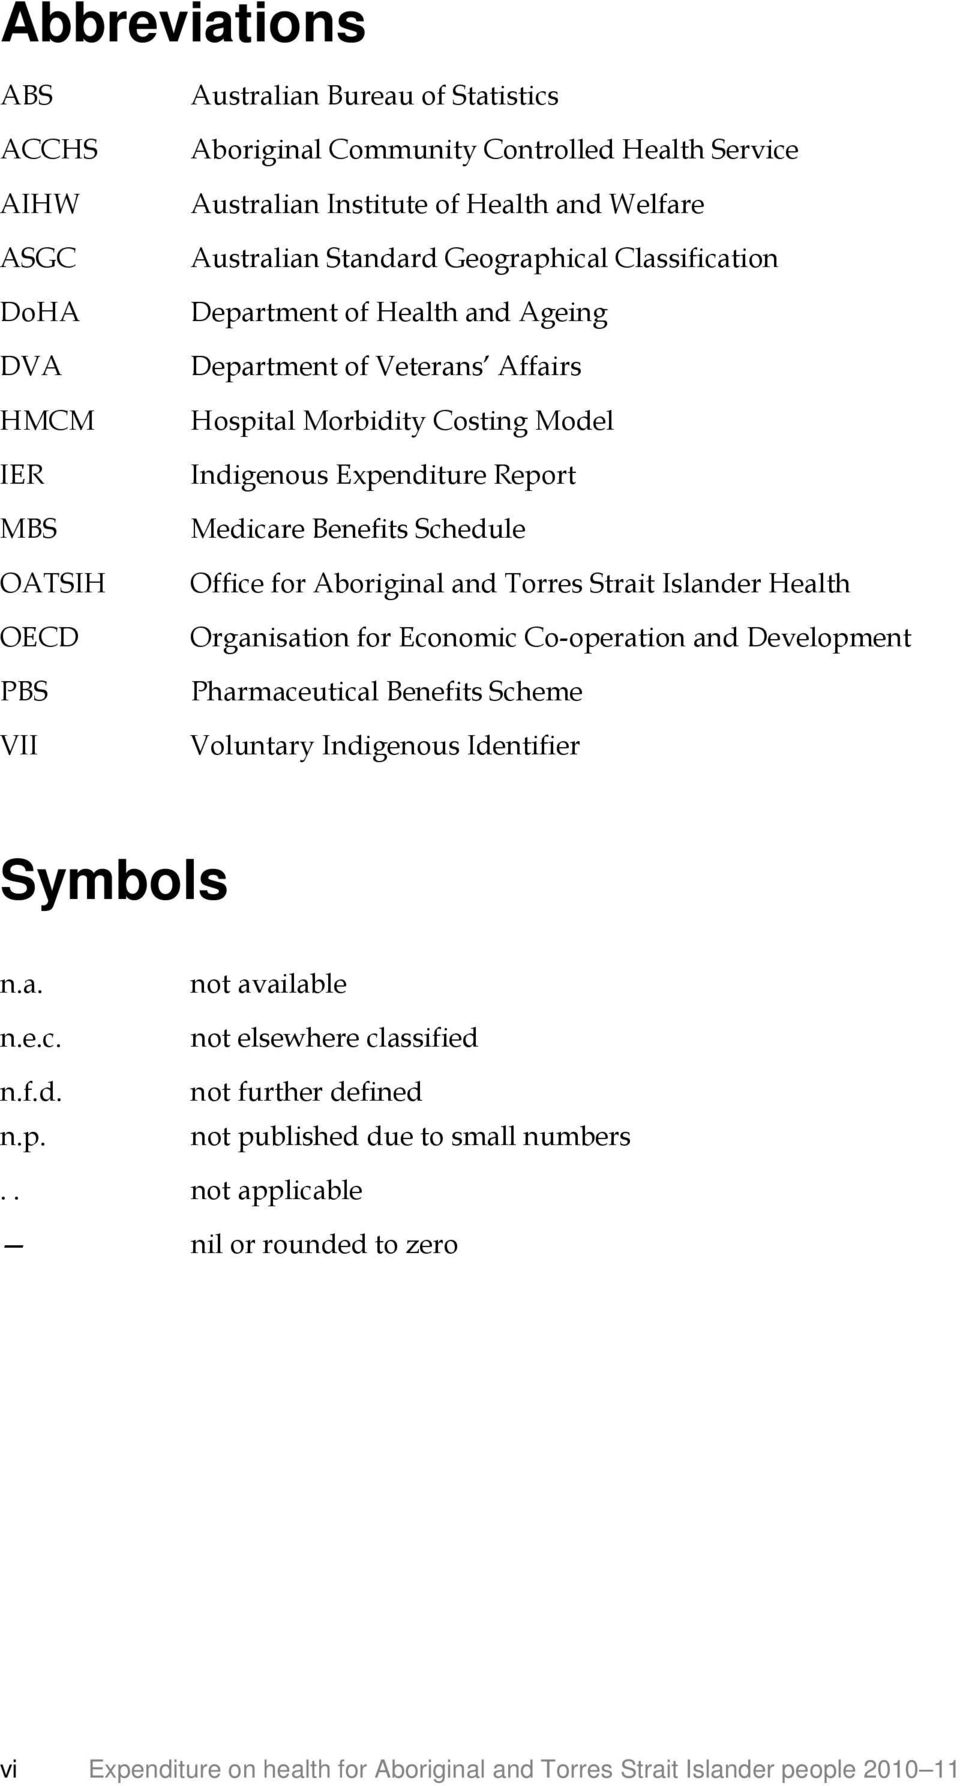 for Aboriginal and Torres Strait Islander Health Organisation for Economic Co-operation and Development Pharmaceutical Benefits Scheme Voluntary Identifier Symbols n.a. n.e.c. n.f.d. n.p. not available not elsewhere classified not further defined not published due to small numbers.